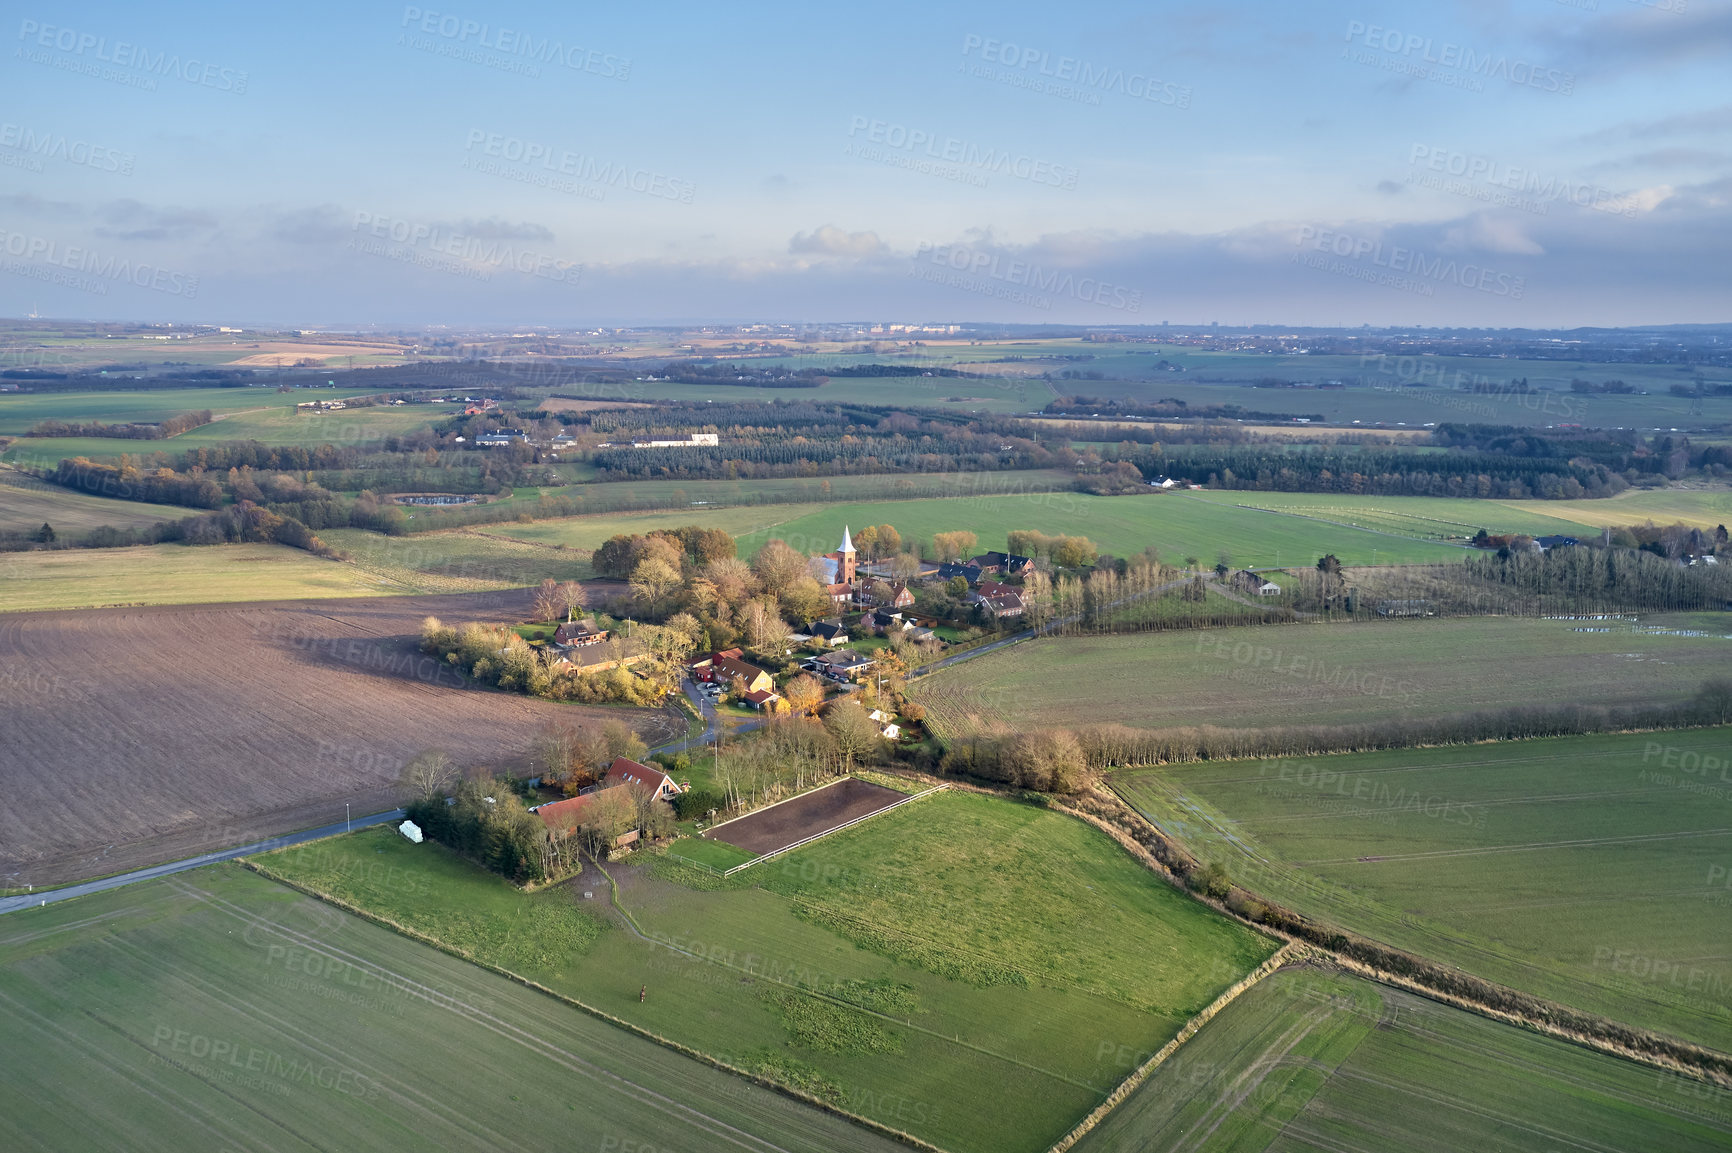 Buy stock photo Drone point of view of private farming estate growing rye, wheat and sunflowers in remote farms and fields in Jutland, Denmark. Scenic aerial landscape of agriculture in green and serene countryside 